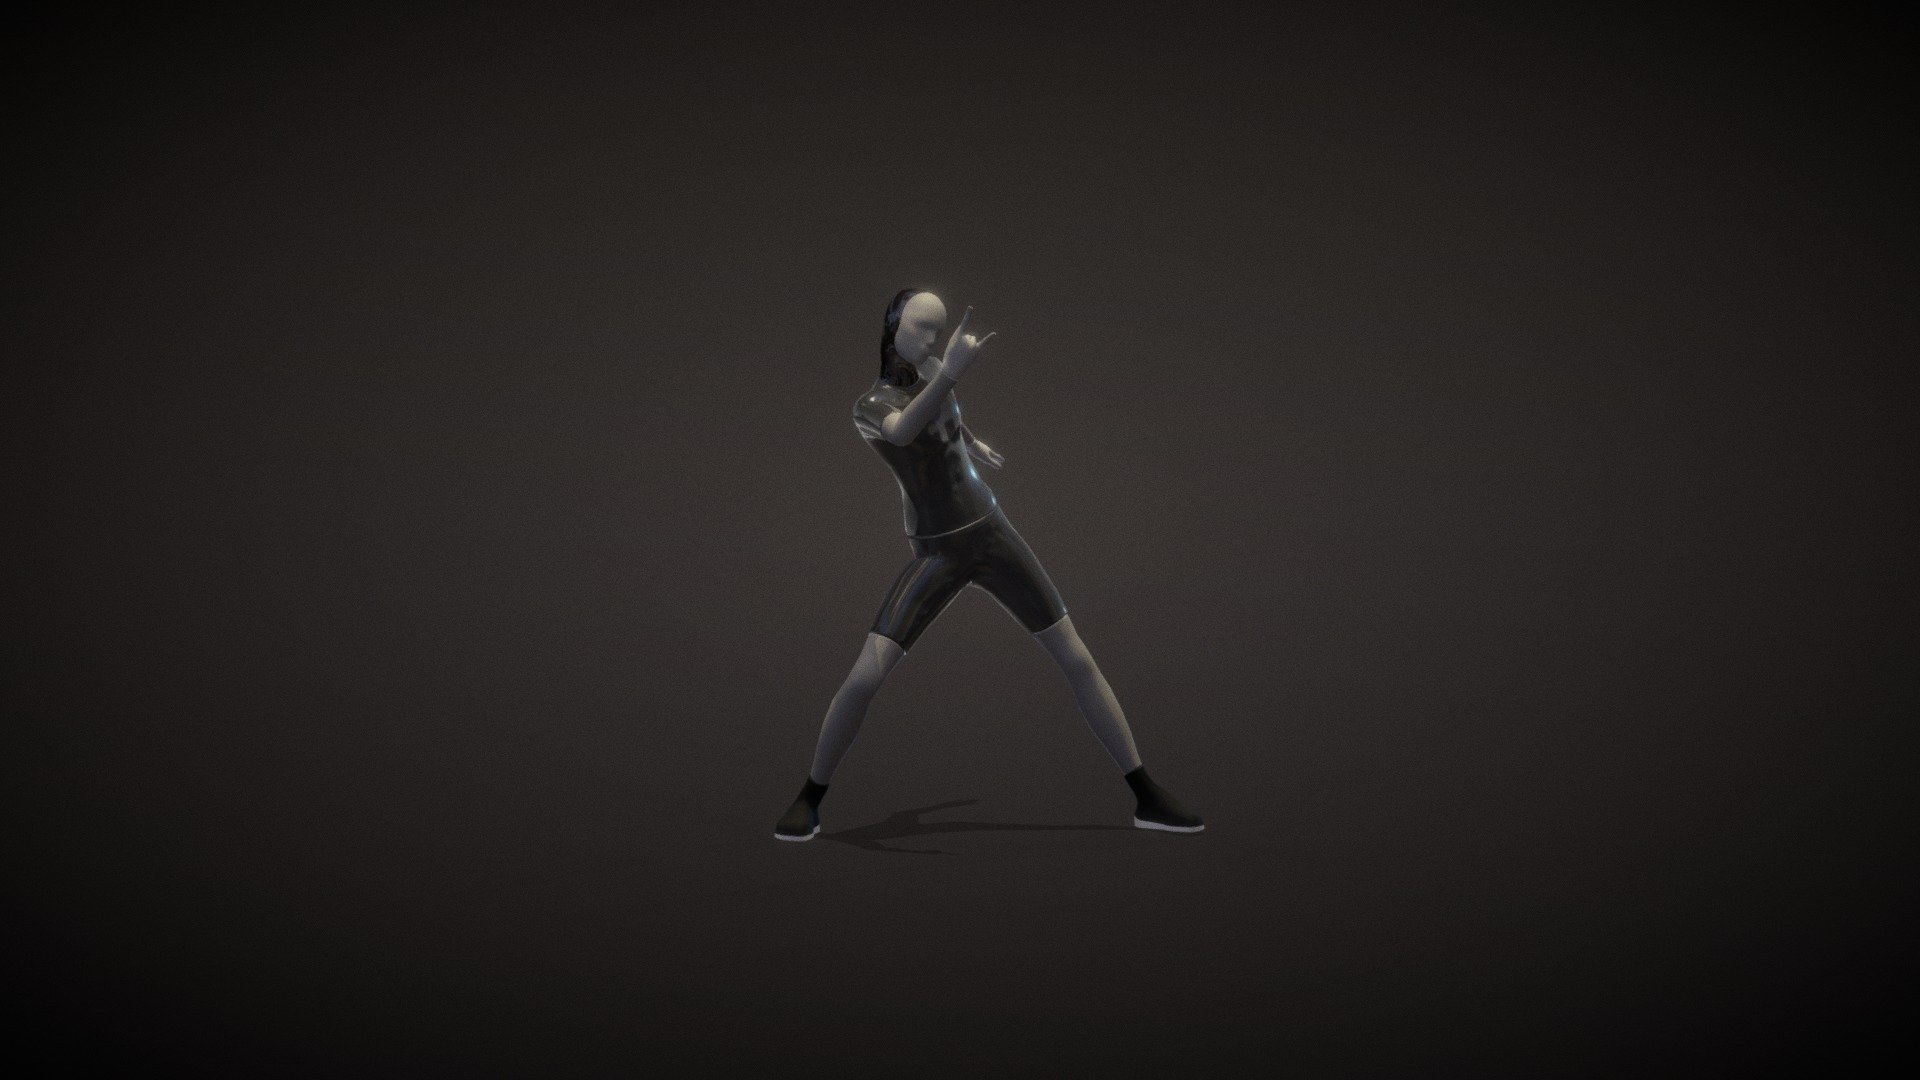 This is technical preview of the character dance animation.
The dance is motivated by original PSY music video and dance &ldquo;Daddy